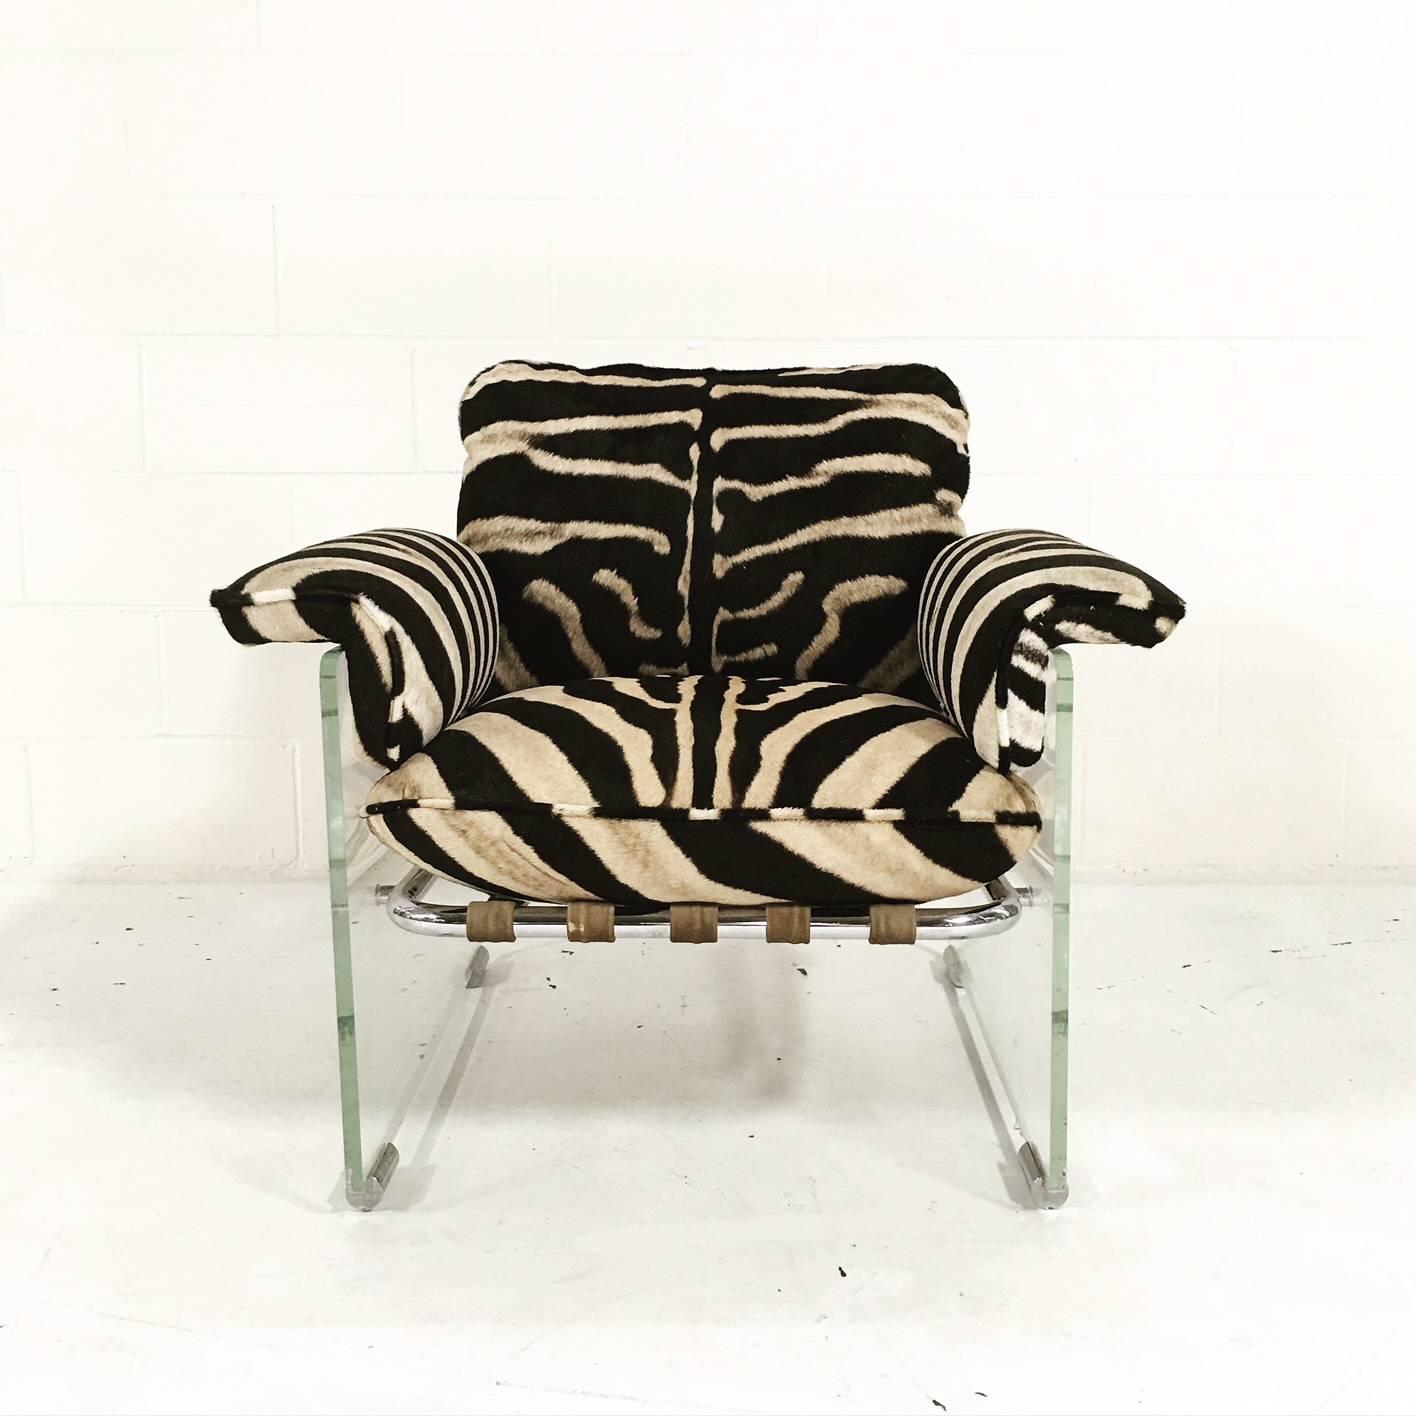 Pace Collection Argenta Lucite and Chrome Lounge Chair and Ottoman in Zebra Hide 3